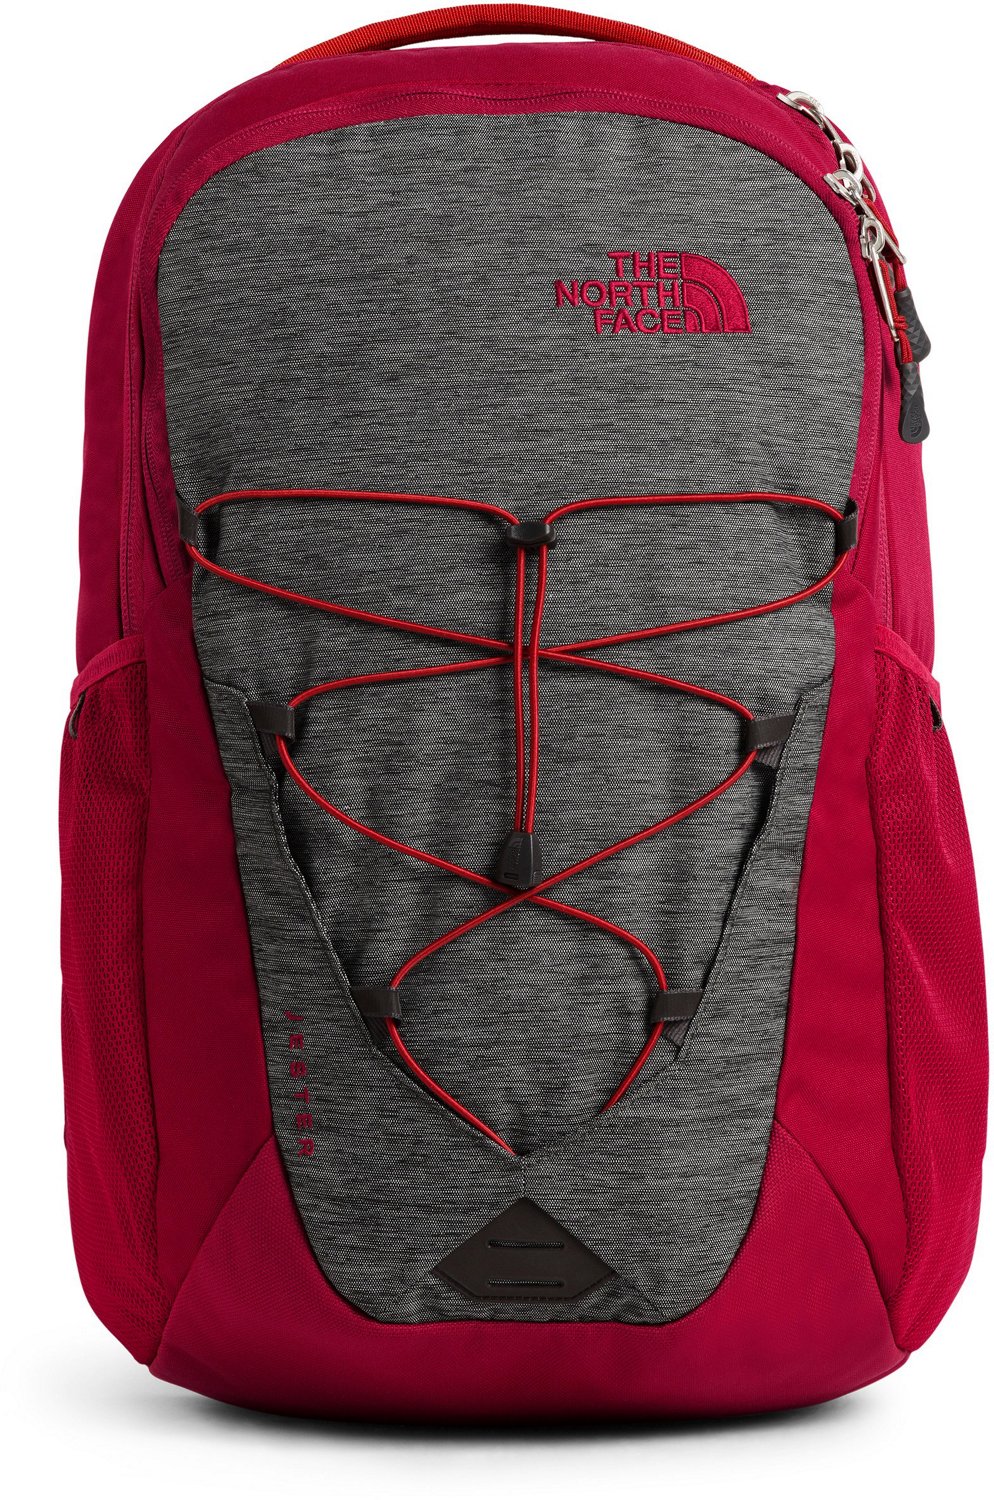 The North Face Jester Backpack | Academy